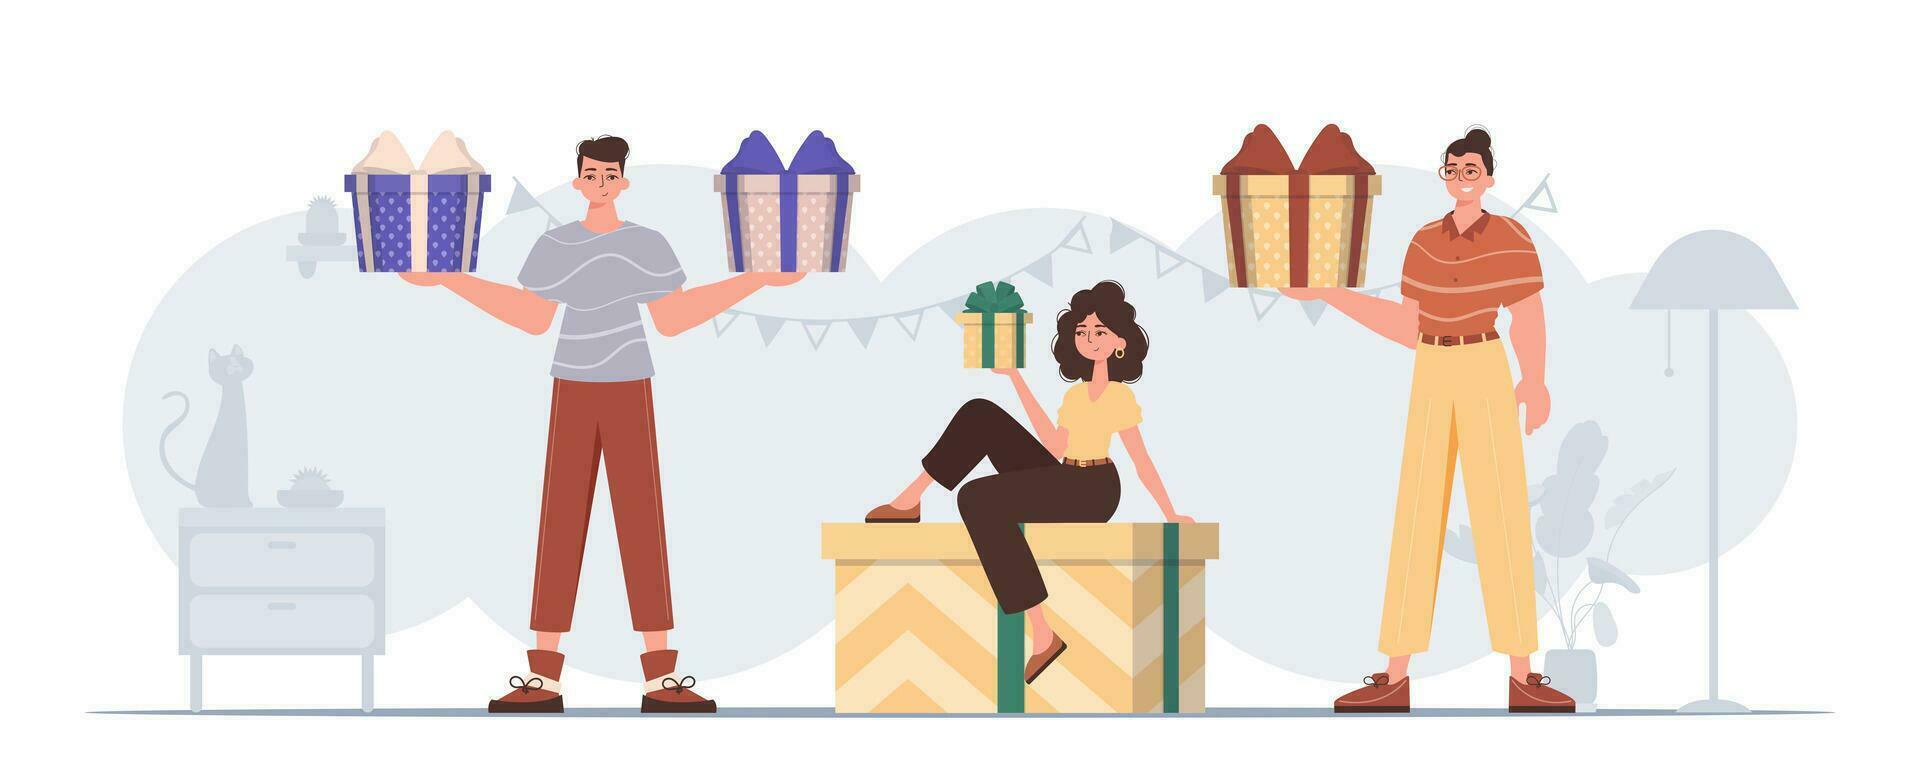 People are holding gifts. Modern flat colorful vector illustration.